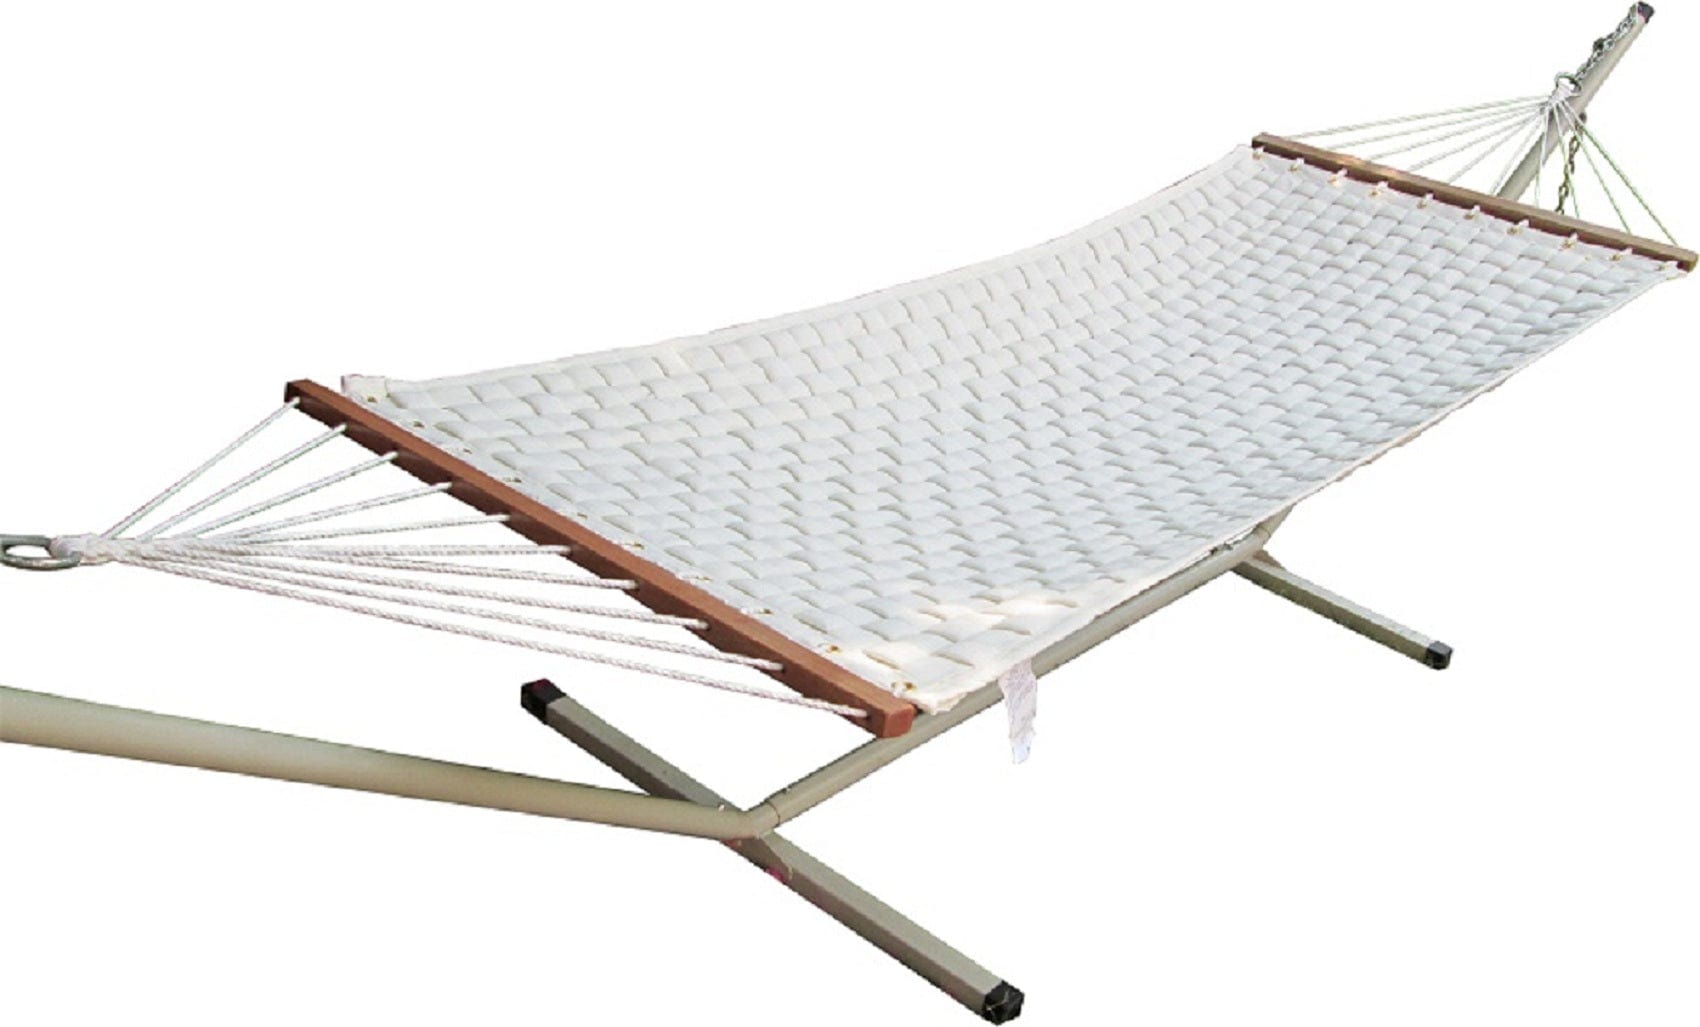 Premium Weave Soft Comb Off-White Hammock Set With Steel Hammock Stand, Weight Capacity of 125 kg